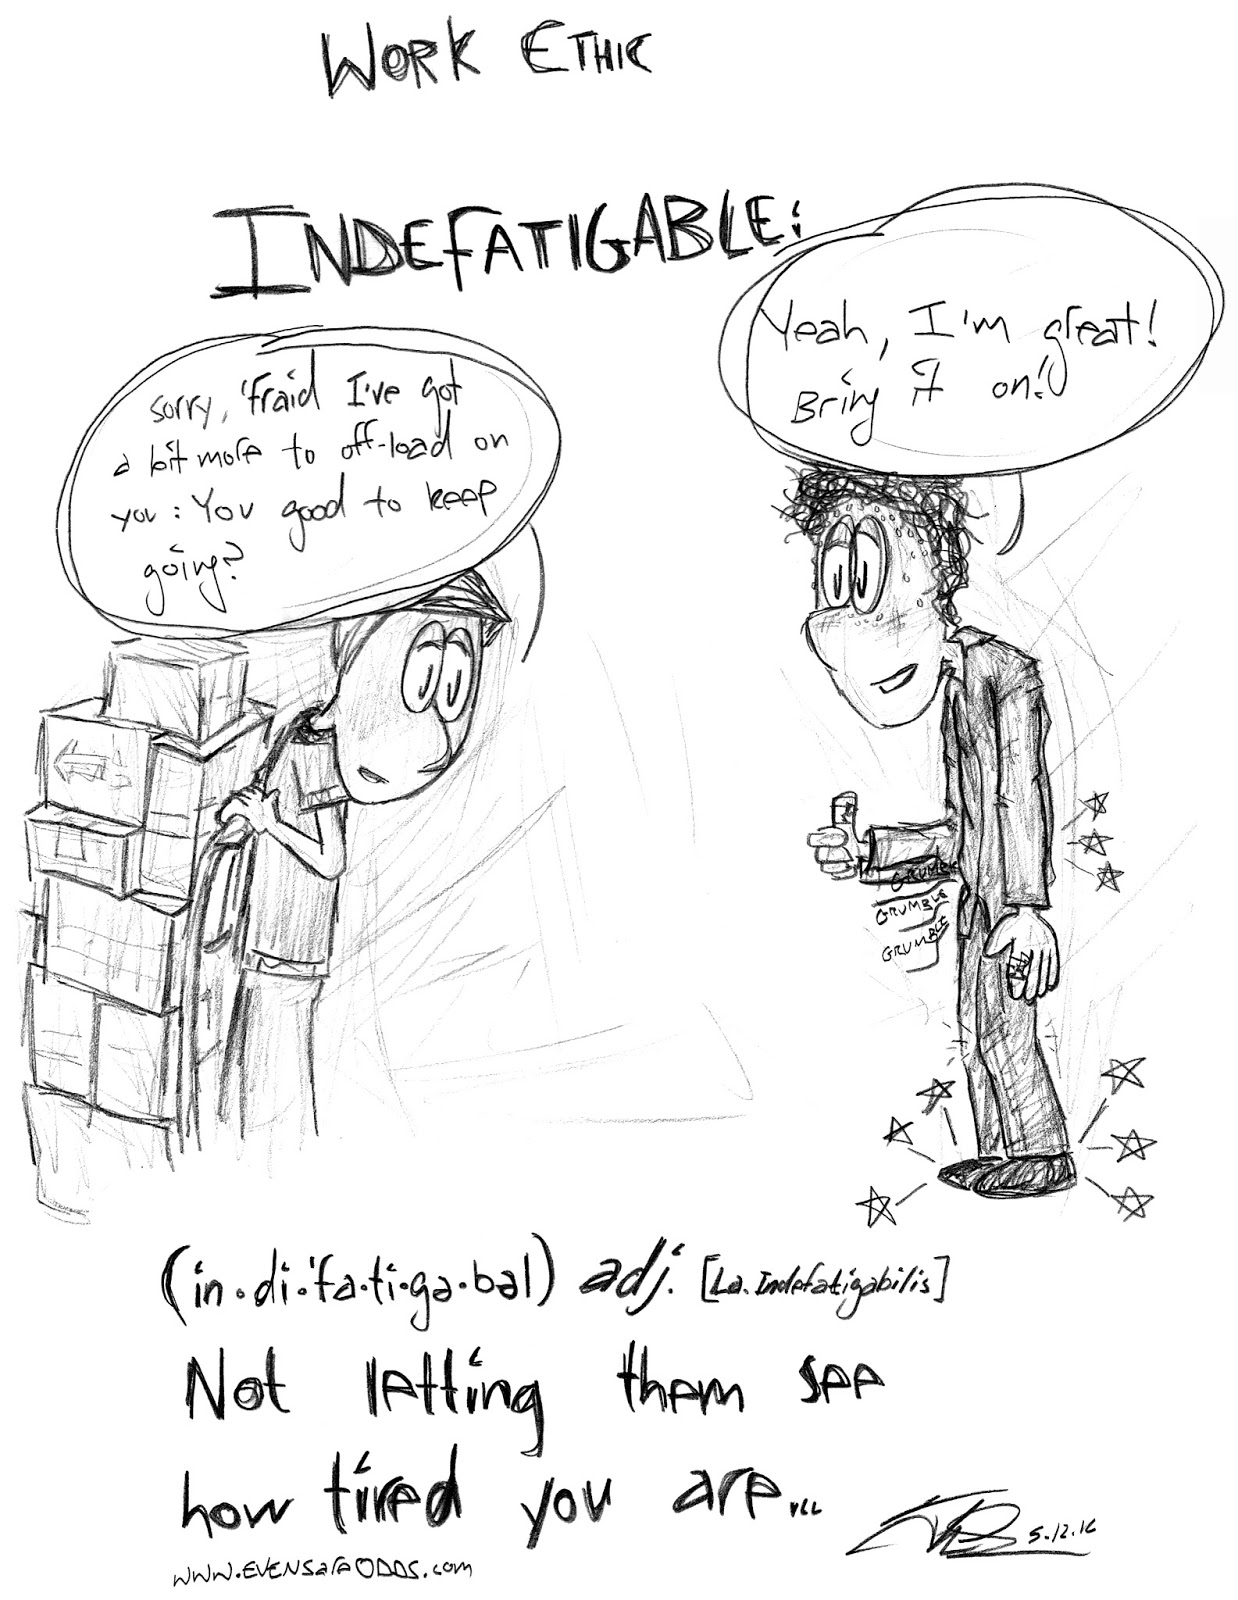 "INDEFATIGABLE: (in.di.'fa.ti.ge.bel) adj. [La. Indefatigabilis] Not letting them see how tired you are..." *Mark carting a large, unruly cart of boxes up to Teddy, smiling, but with lots of cartoony aches radiating, a grumbling stomach, etc.*  MARK: "Sorry, 'fraid I've got a bit more to off-load on you: You good to keep going?"  TEDDY: "Yeah, I'm great! Bring it on!"